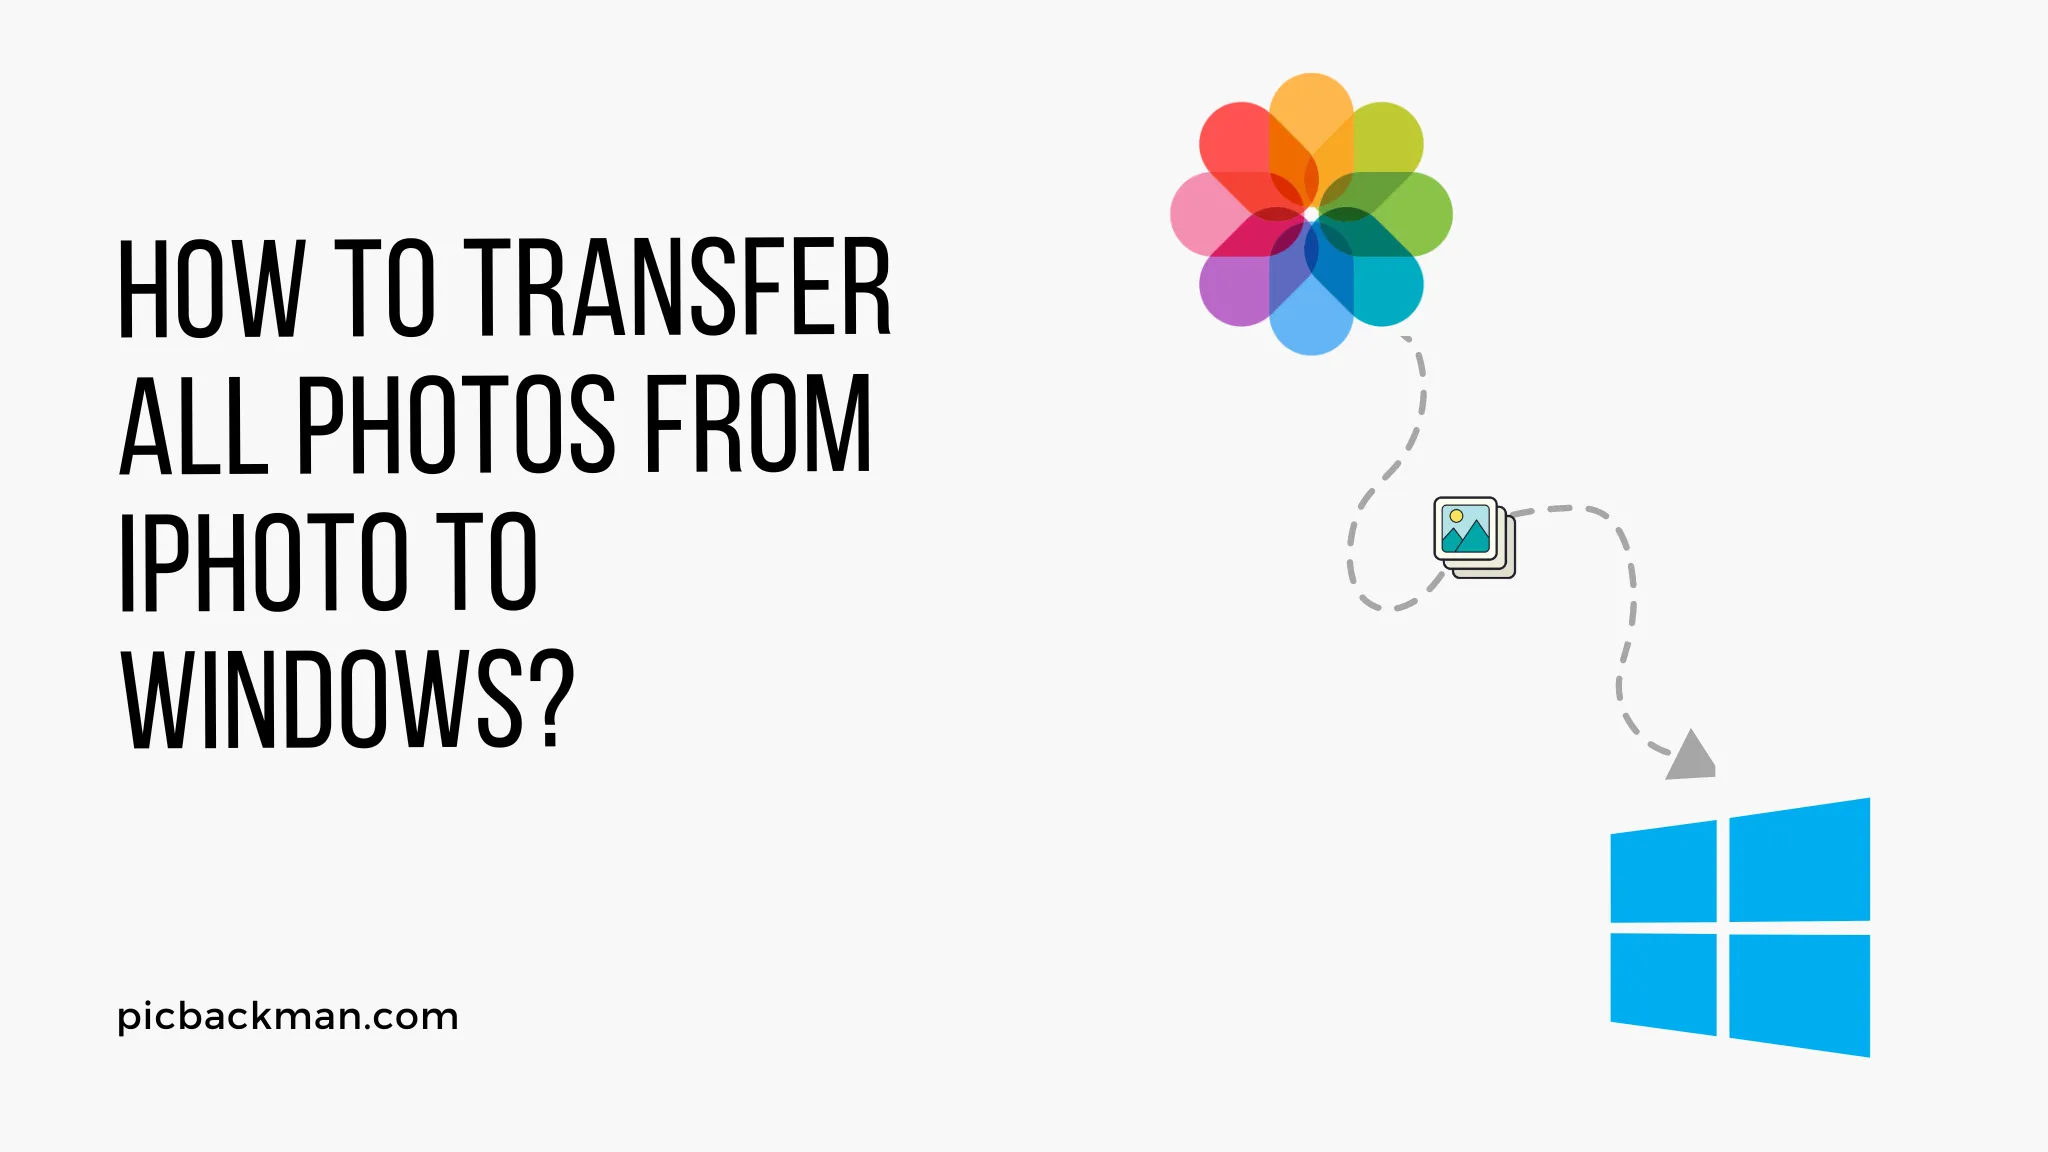 How to Transfer All Photos from iPhoto to Windows?